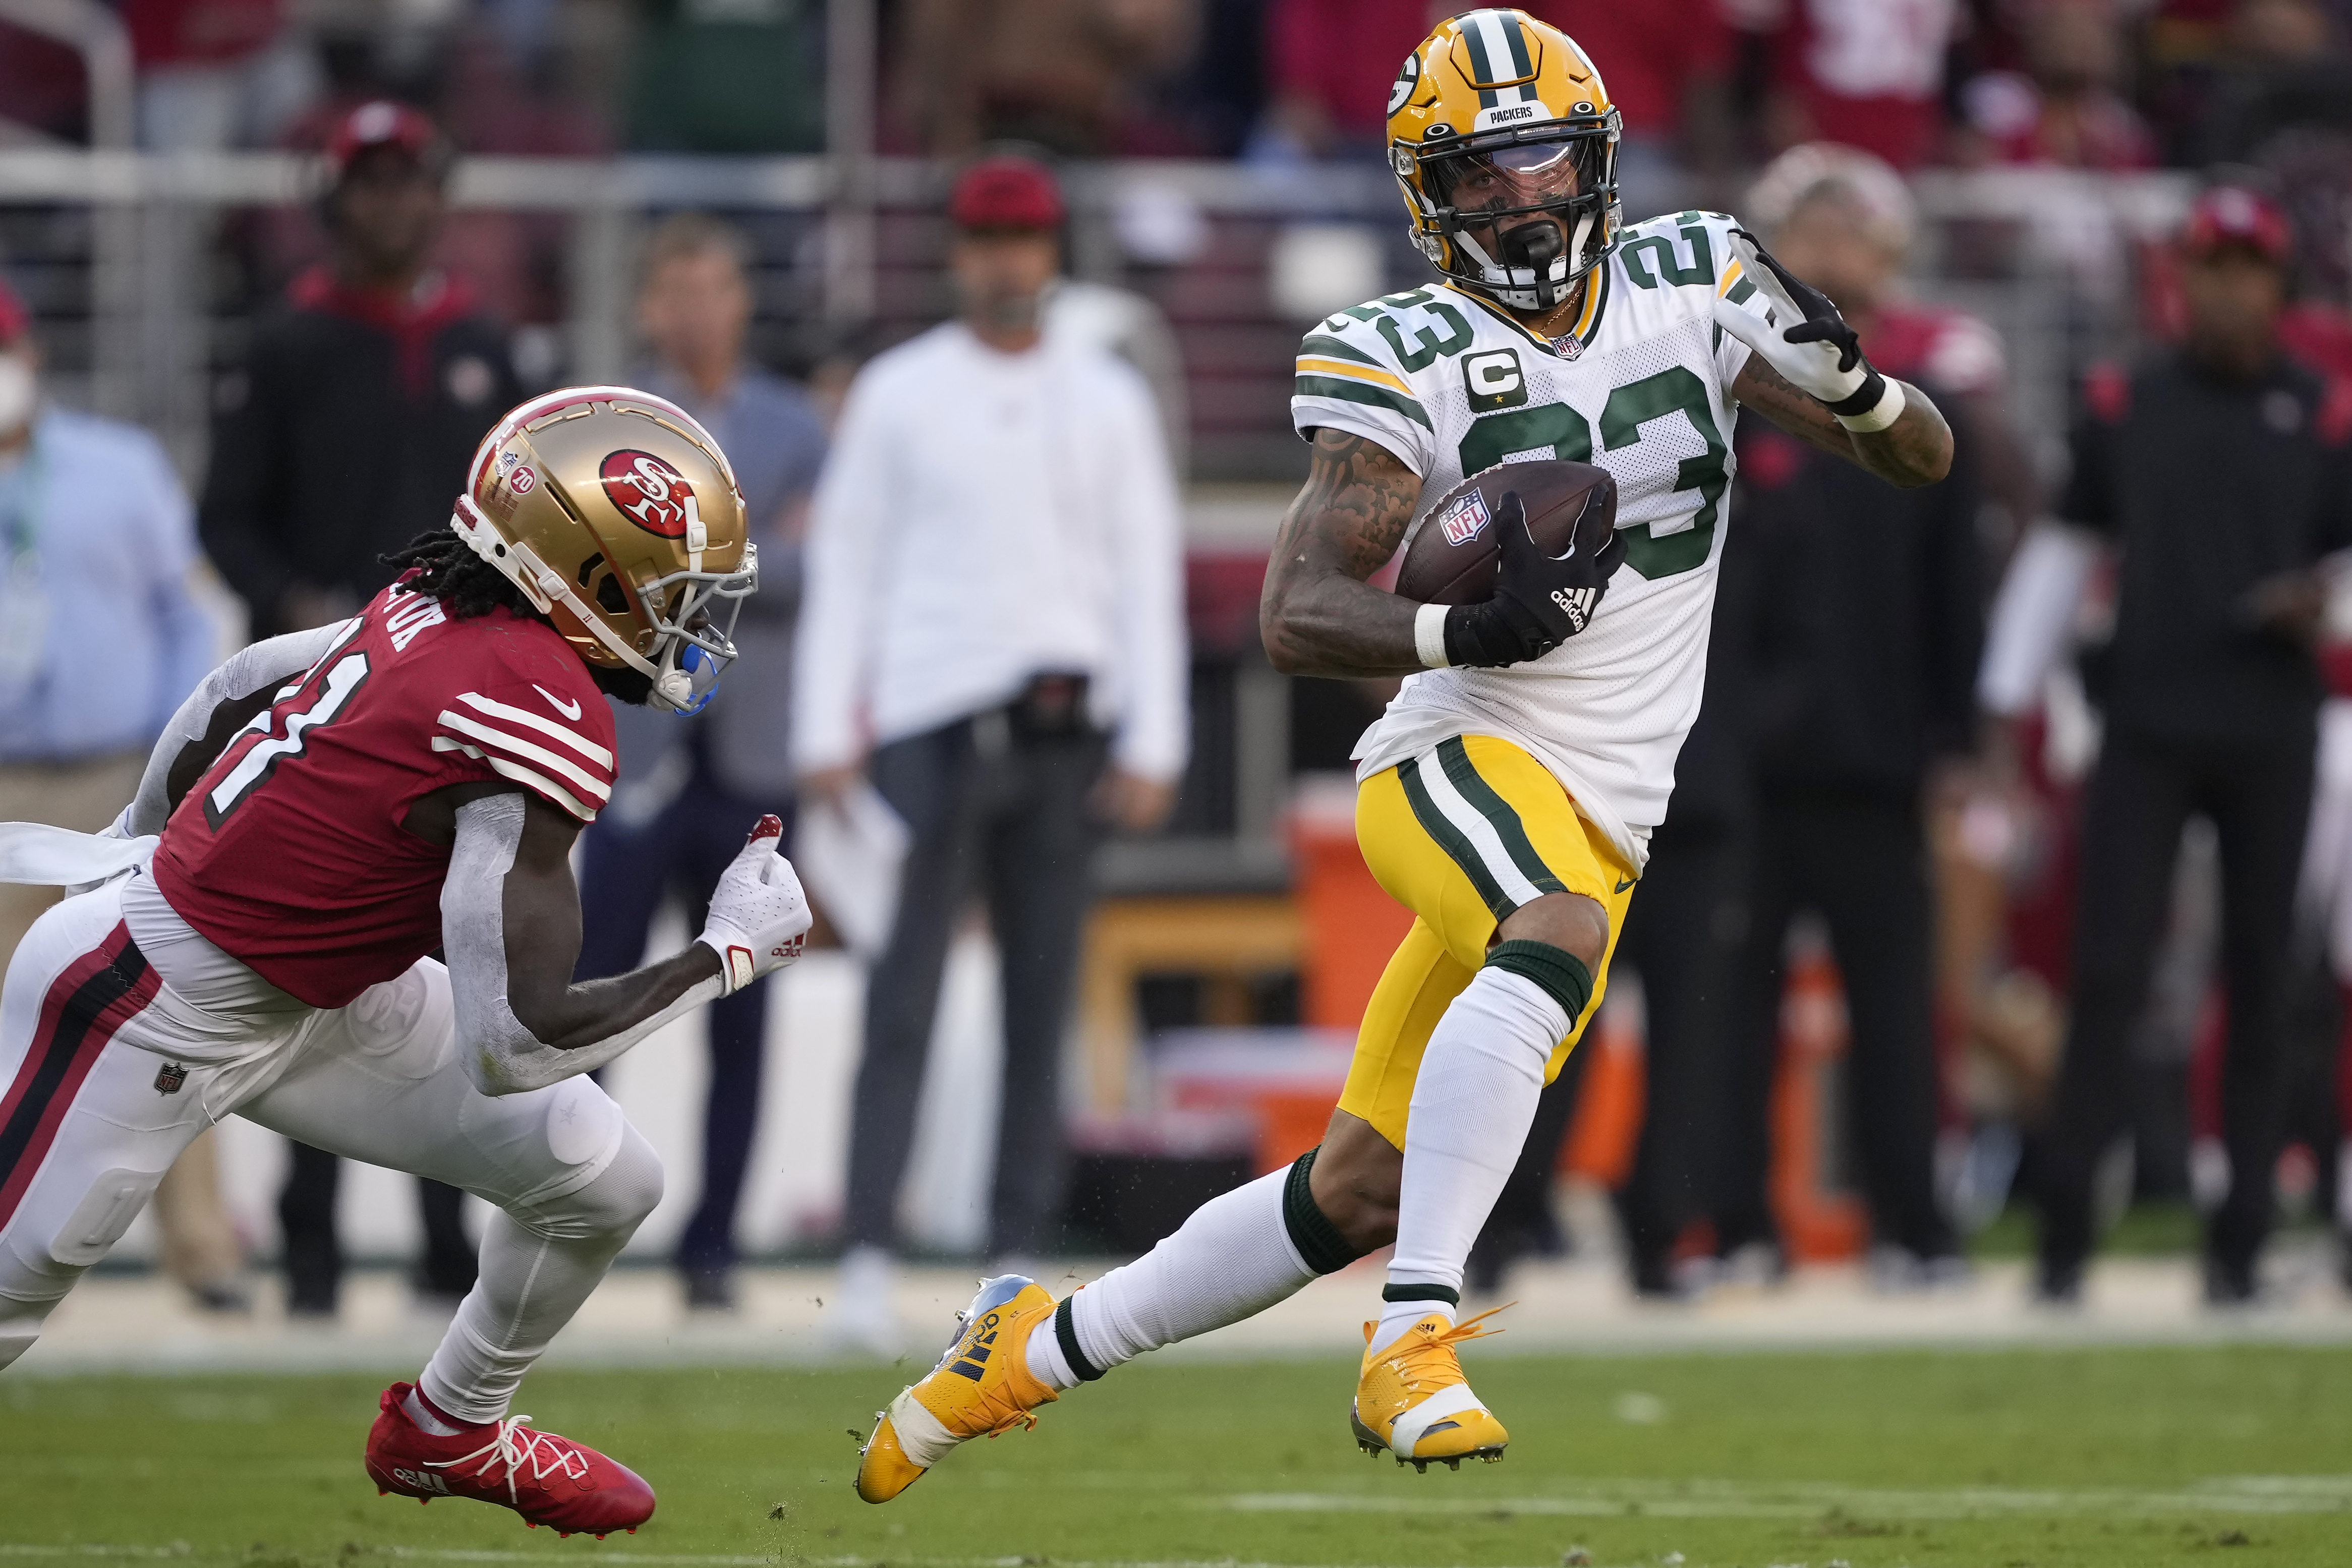 Packers v. 49ers Preseason 2022: Game time, how to watch on TV